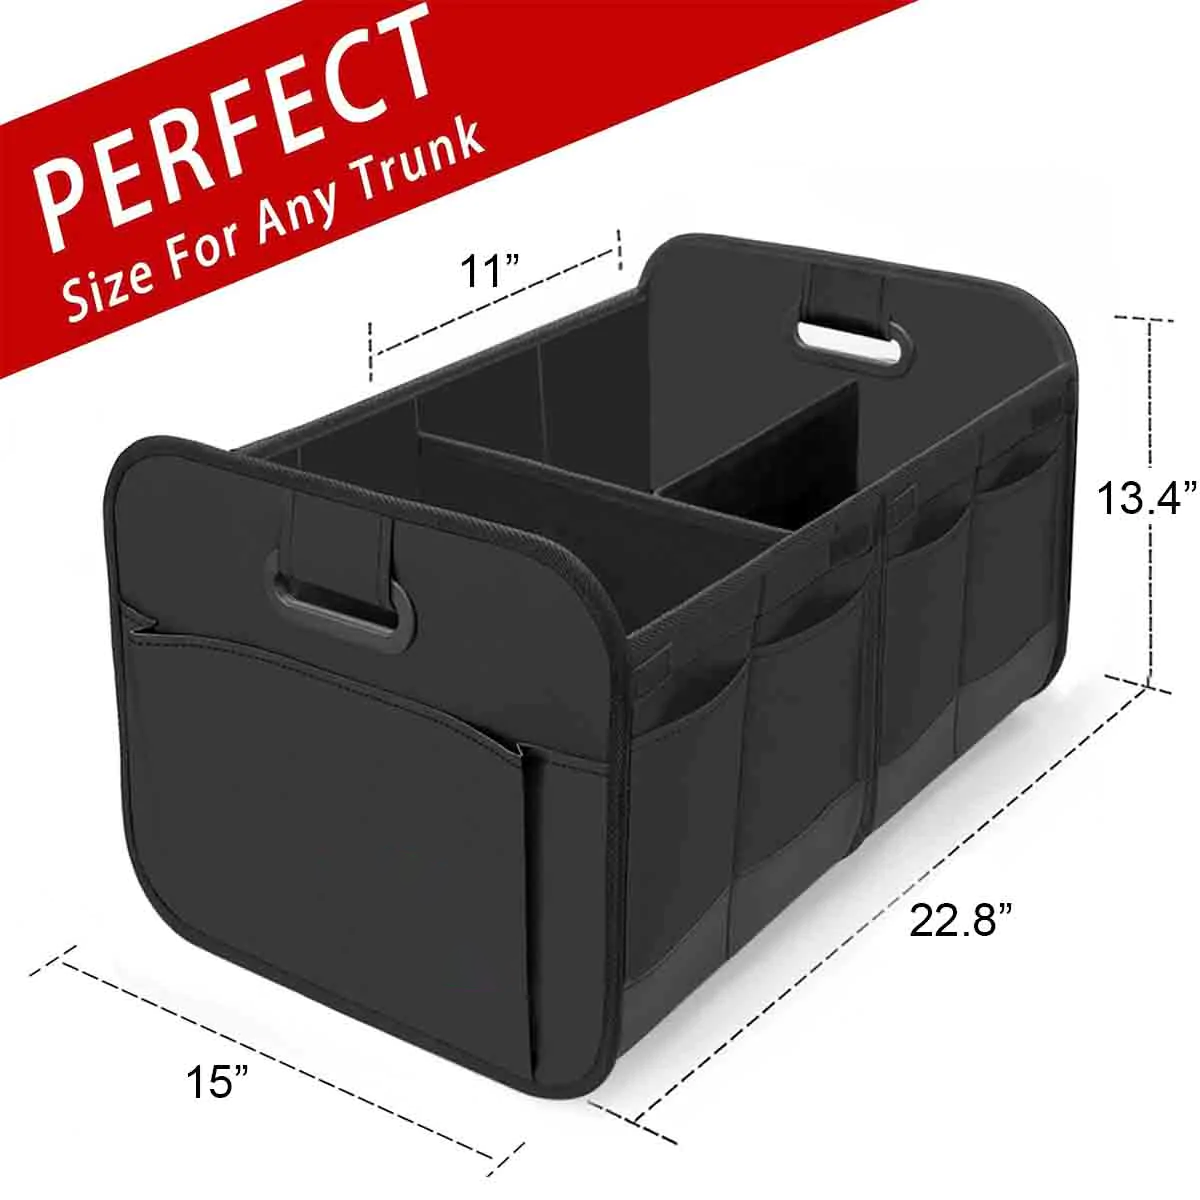 Custom Text For Car Trunk Organizer Storage, Compatible with All Cars, Reinforced Handles, Collapsible Multi, Compartment Car Organizers, Foldable and Waterproof, 600D Oxford Polyester DA12995